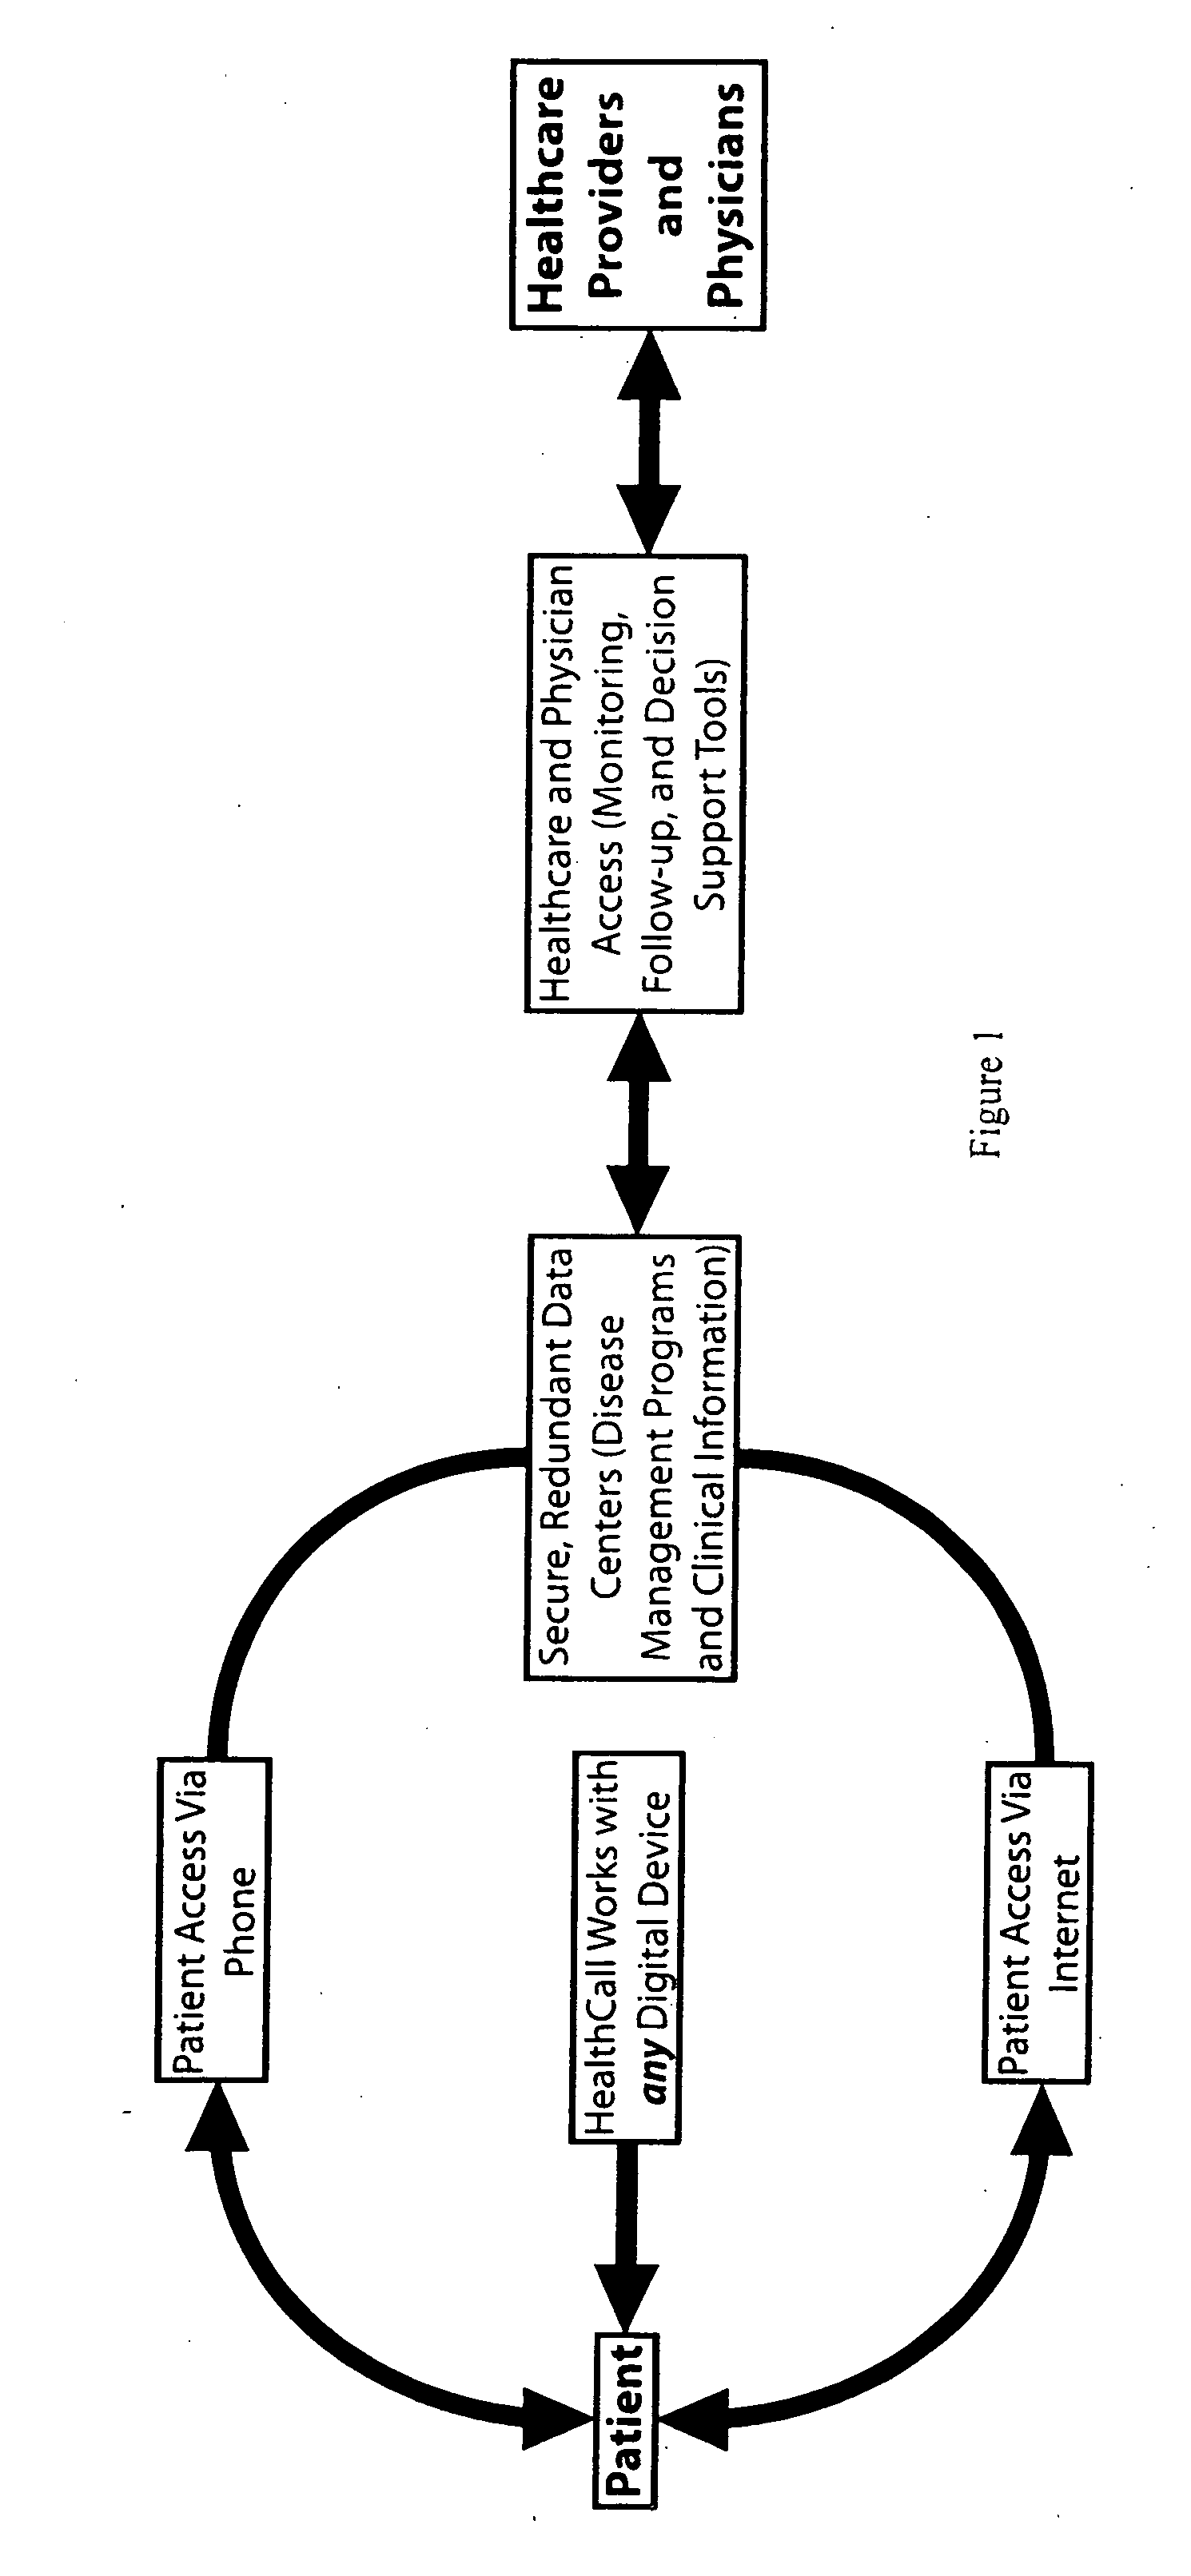 Information management and communications system for communication between patients and healthcare providers